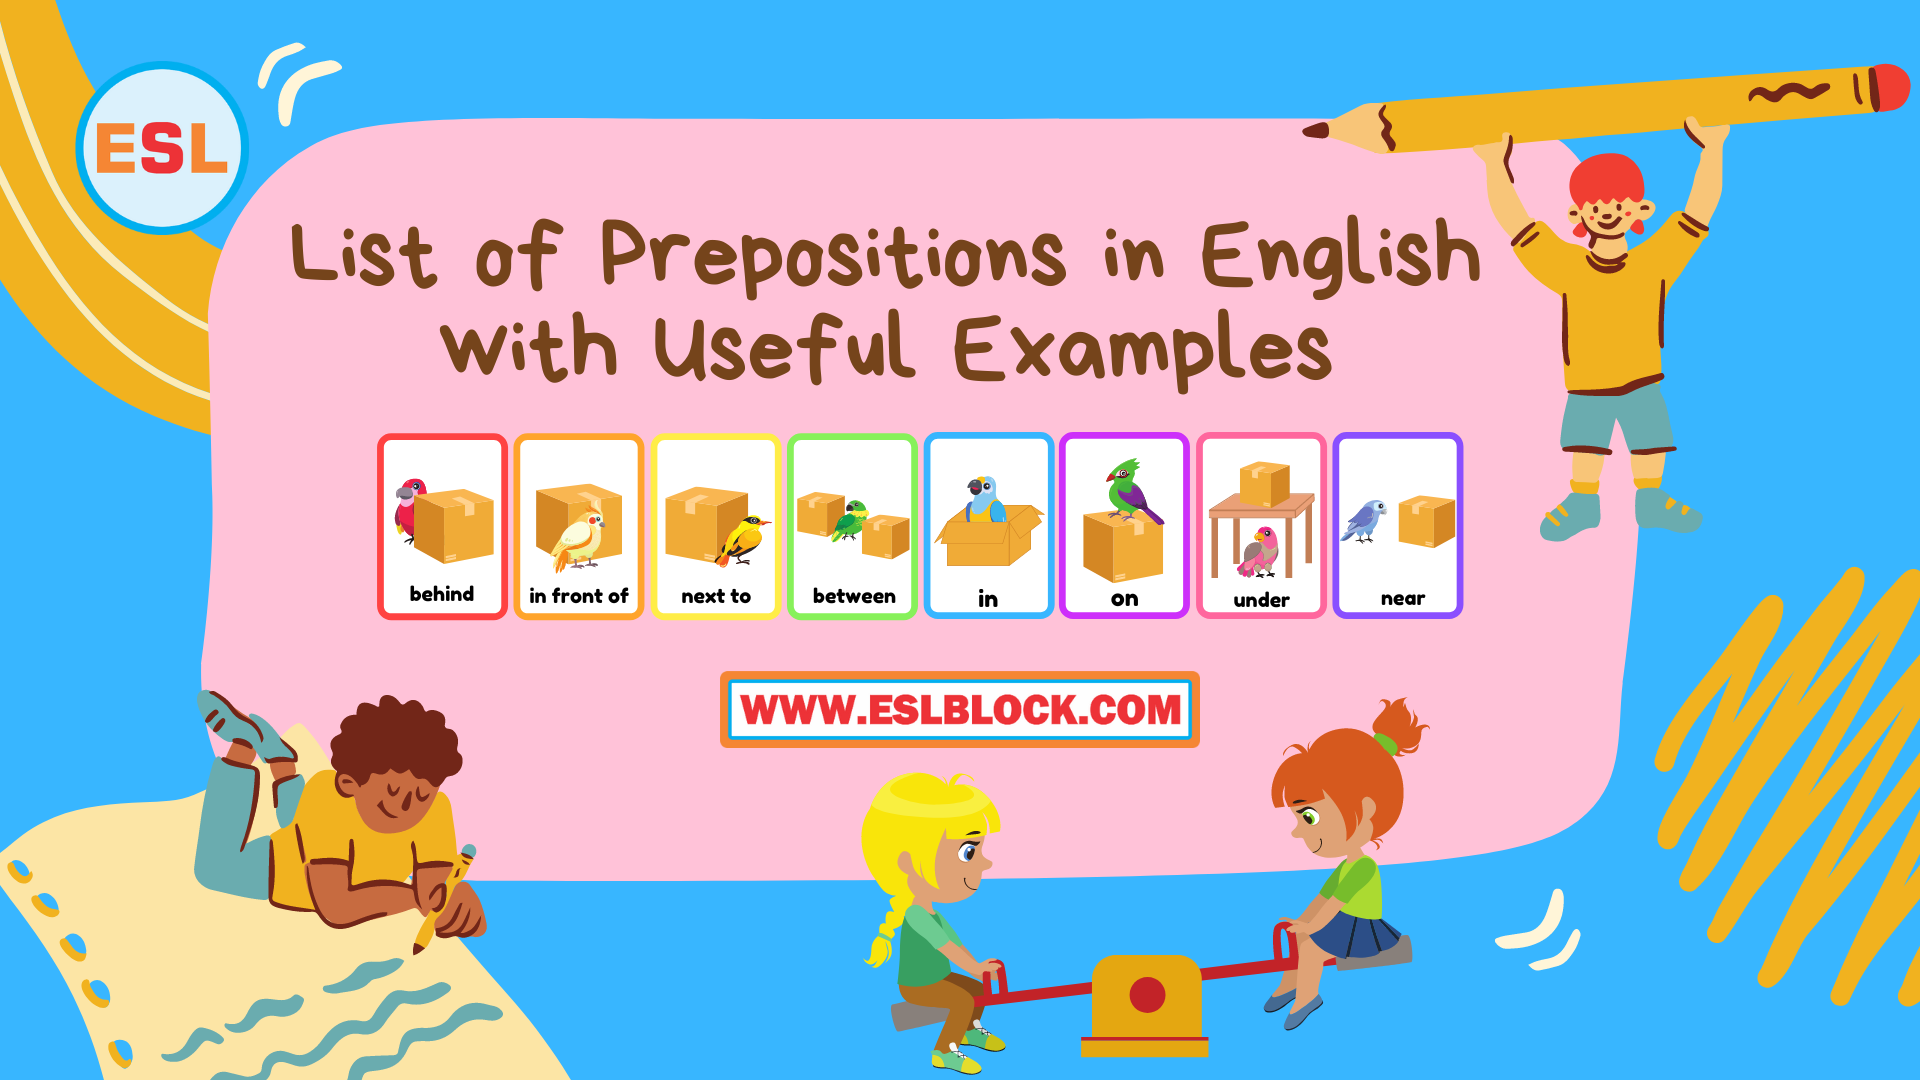 100 Example Sentences Using Prepositions, All Prepositions, Prepositional Vocabulary, Prepositions, Prepositions vocabulary, Prepositions with Example Sentences, Types of Prepositions, Types of Prepositions with Example Sentences, What are Prepositions, What are the types of Prepositions, What is a Preposition